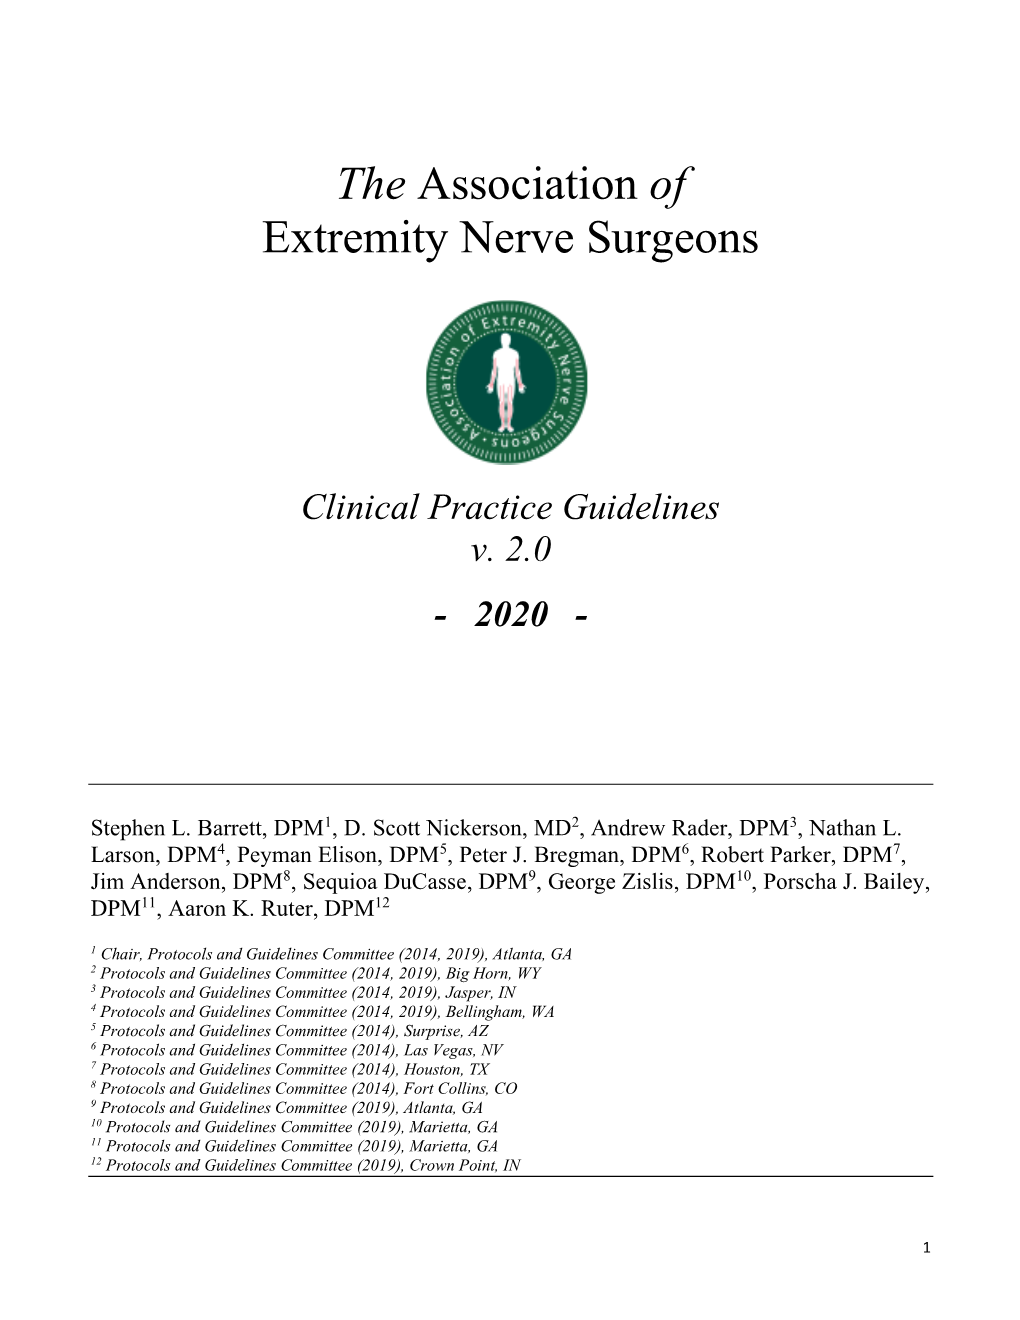 Clinical Practice Guidelines V. 2.0